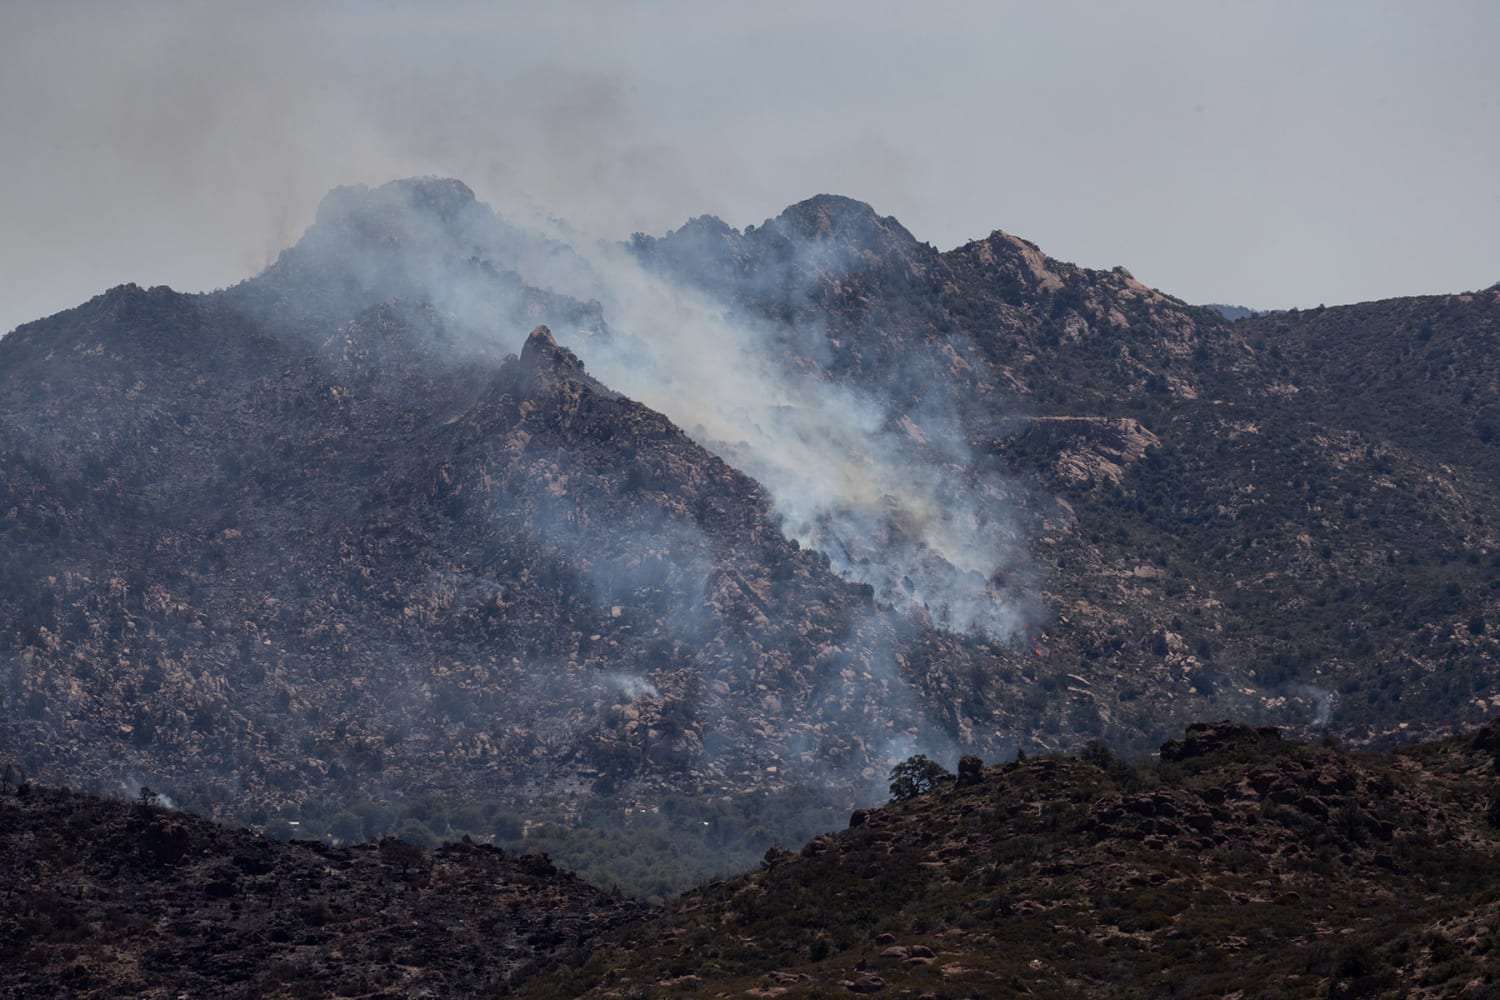 Utah fire from May reignites and spreads rapidly amid heat, wind and lightning